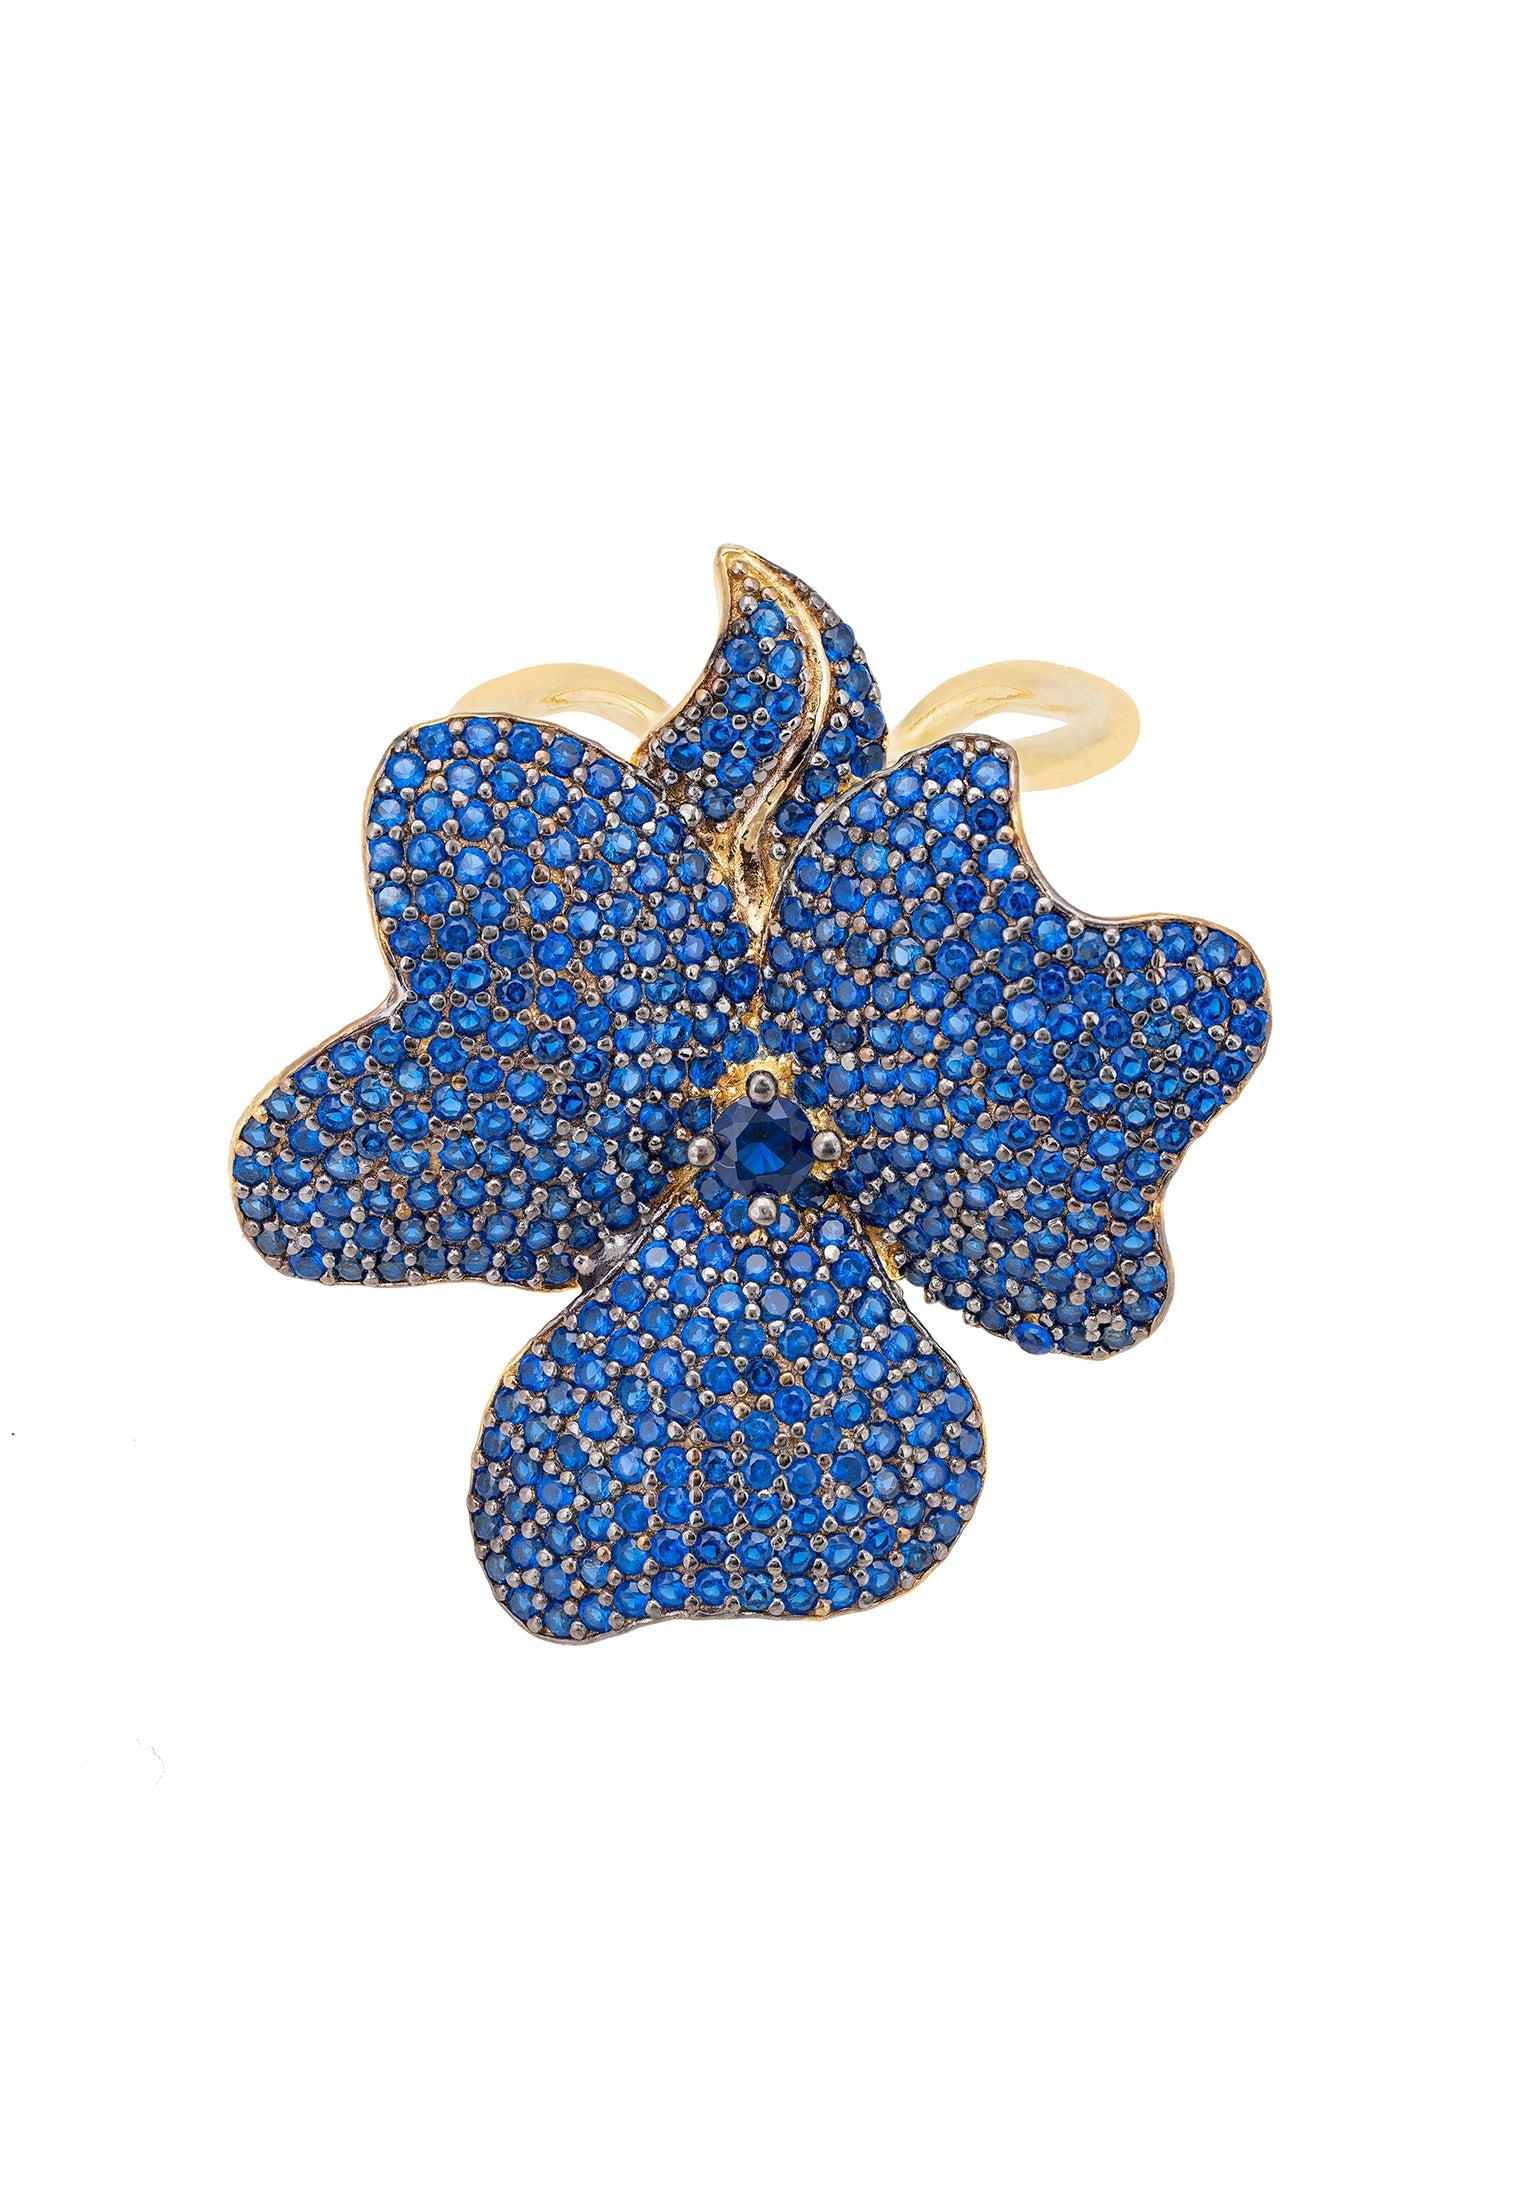 Gold Flower Cocktail Ring with Sapphire Blue CZ - Statement Jewelry for Evening Events and Weddings Bijou Her